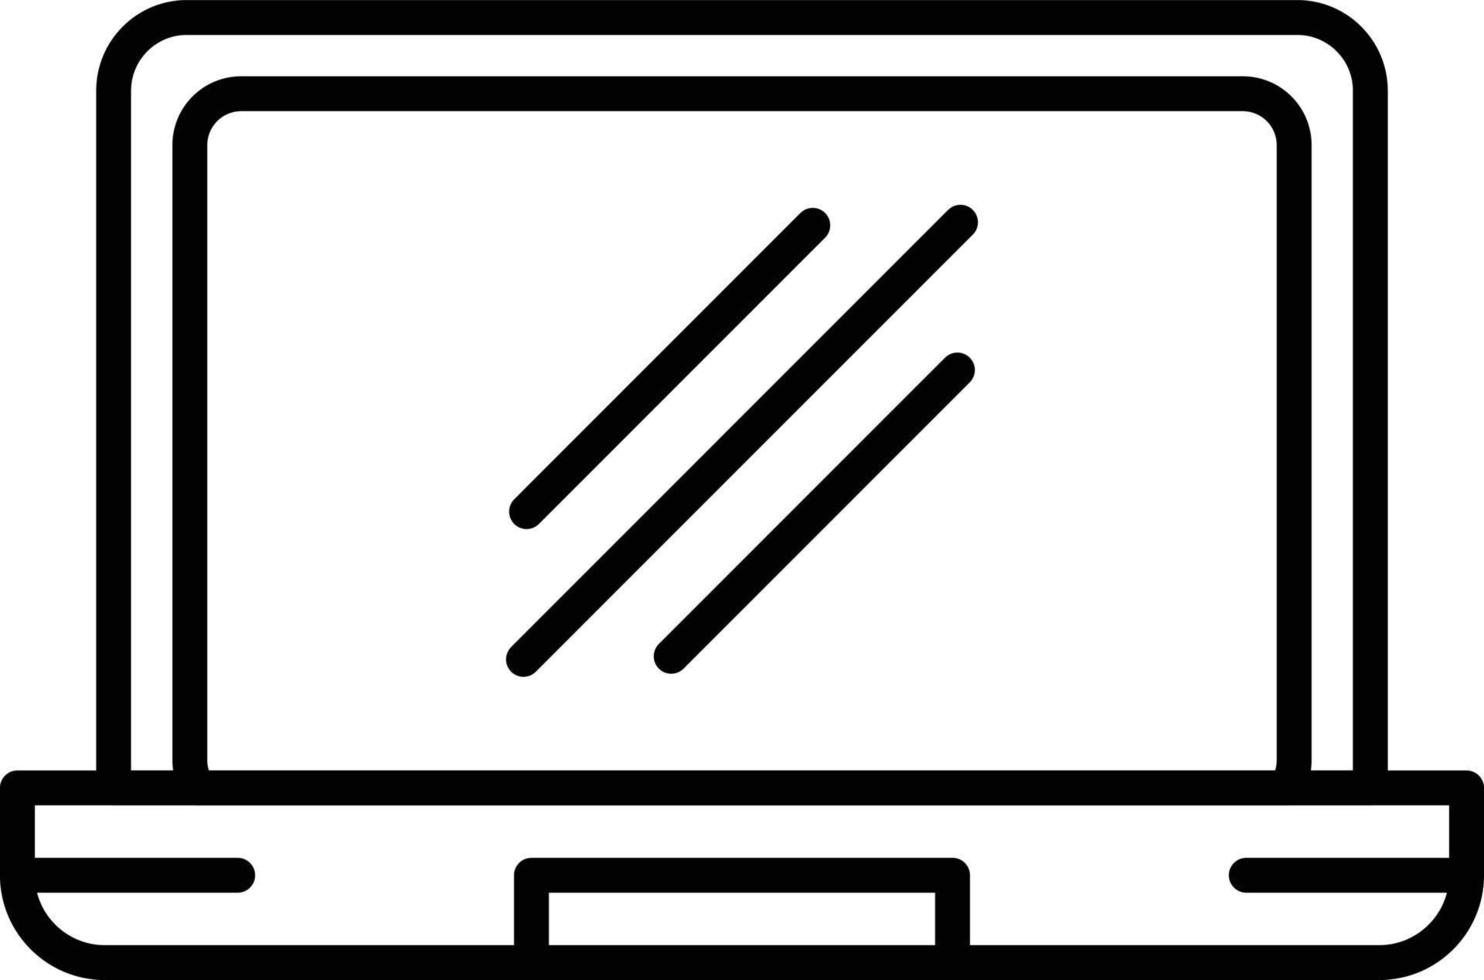 Laptop Outline Icon vector